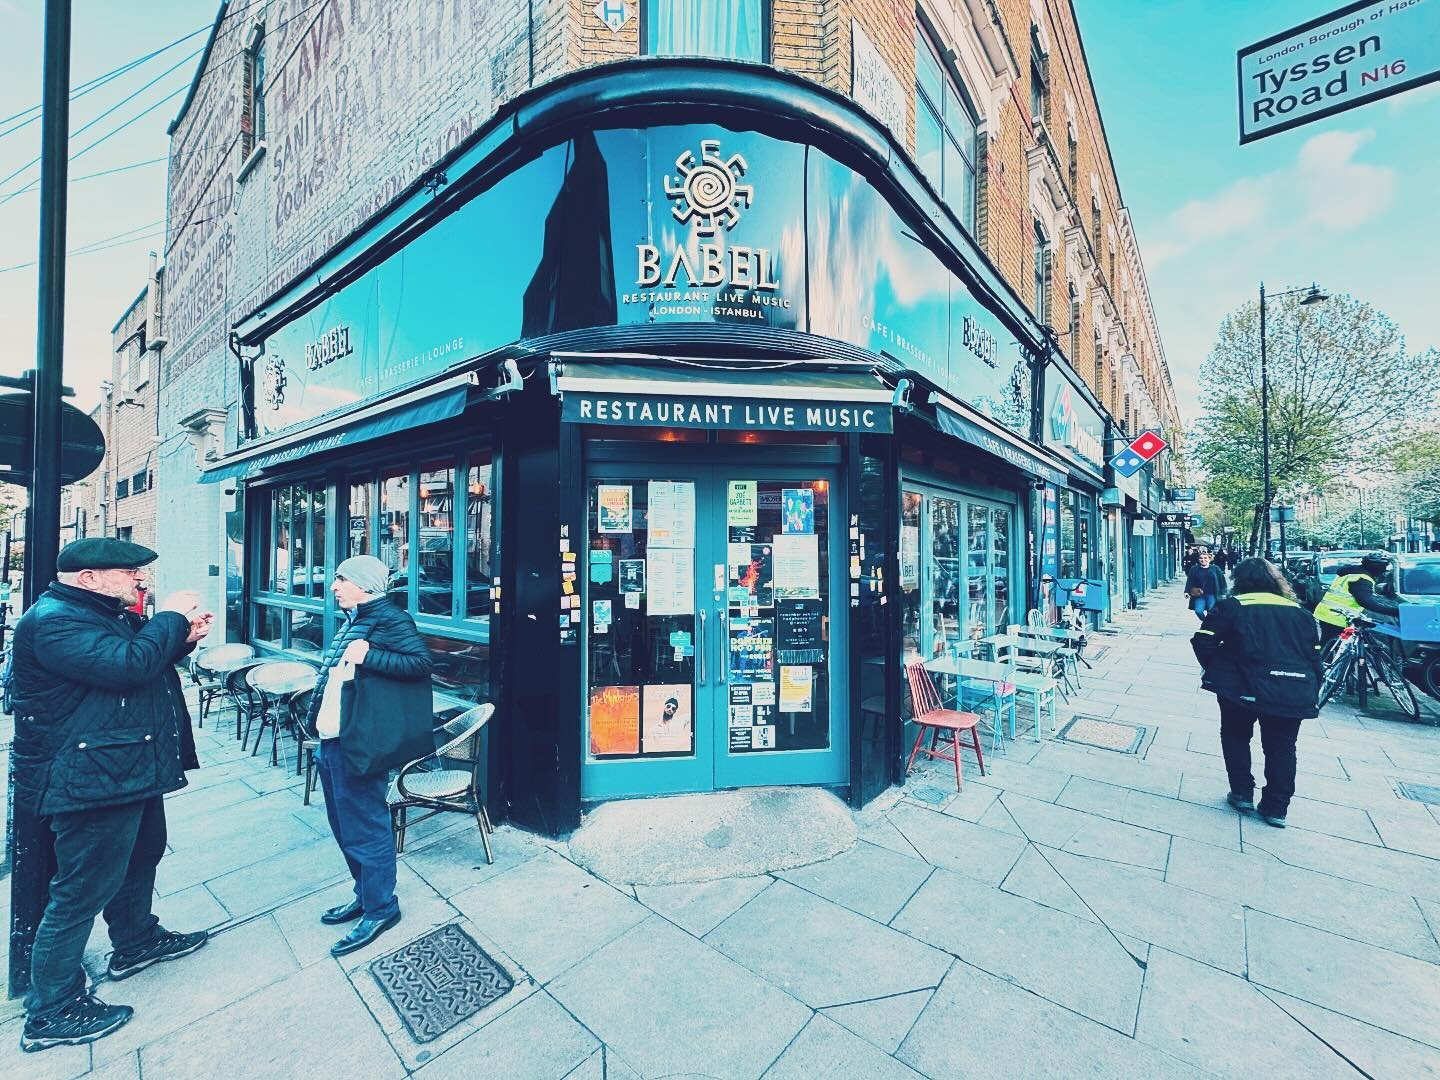 From Monday April 22 our in-person conversation group is moving to @babelarthouse, Tyssen Road and Stoke Newington High Street. For more information head to www.meetup.com/hackneyspanish (or link on bio).